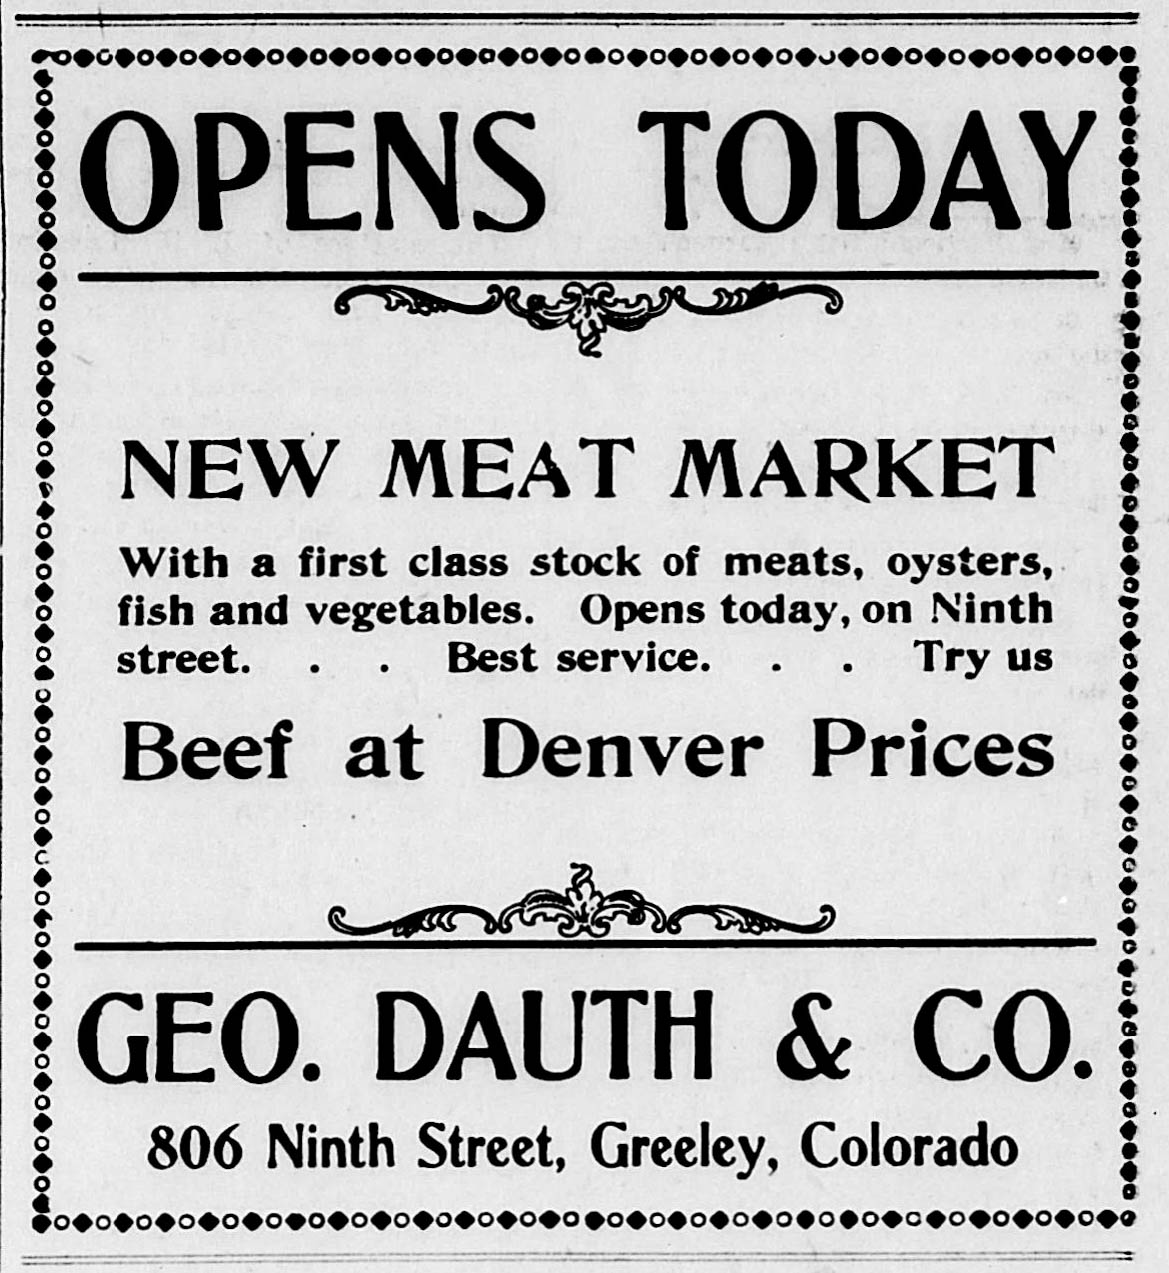 Idlewild Lodge - idlewildlodge.github.io - 1904-01-07 - The Greeley Tribune - George Dauth's first advertisement for his Meat Market on 806 9th Street